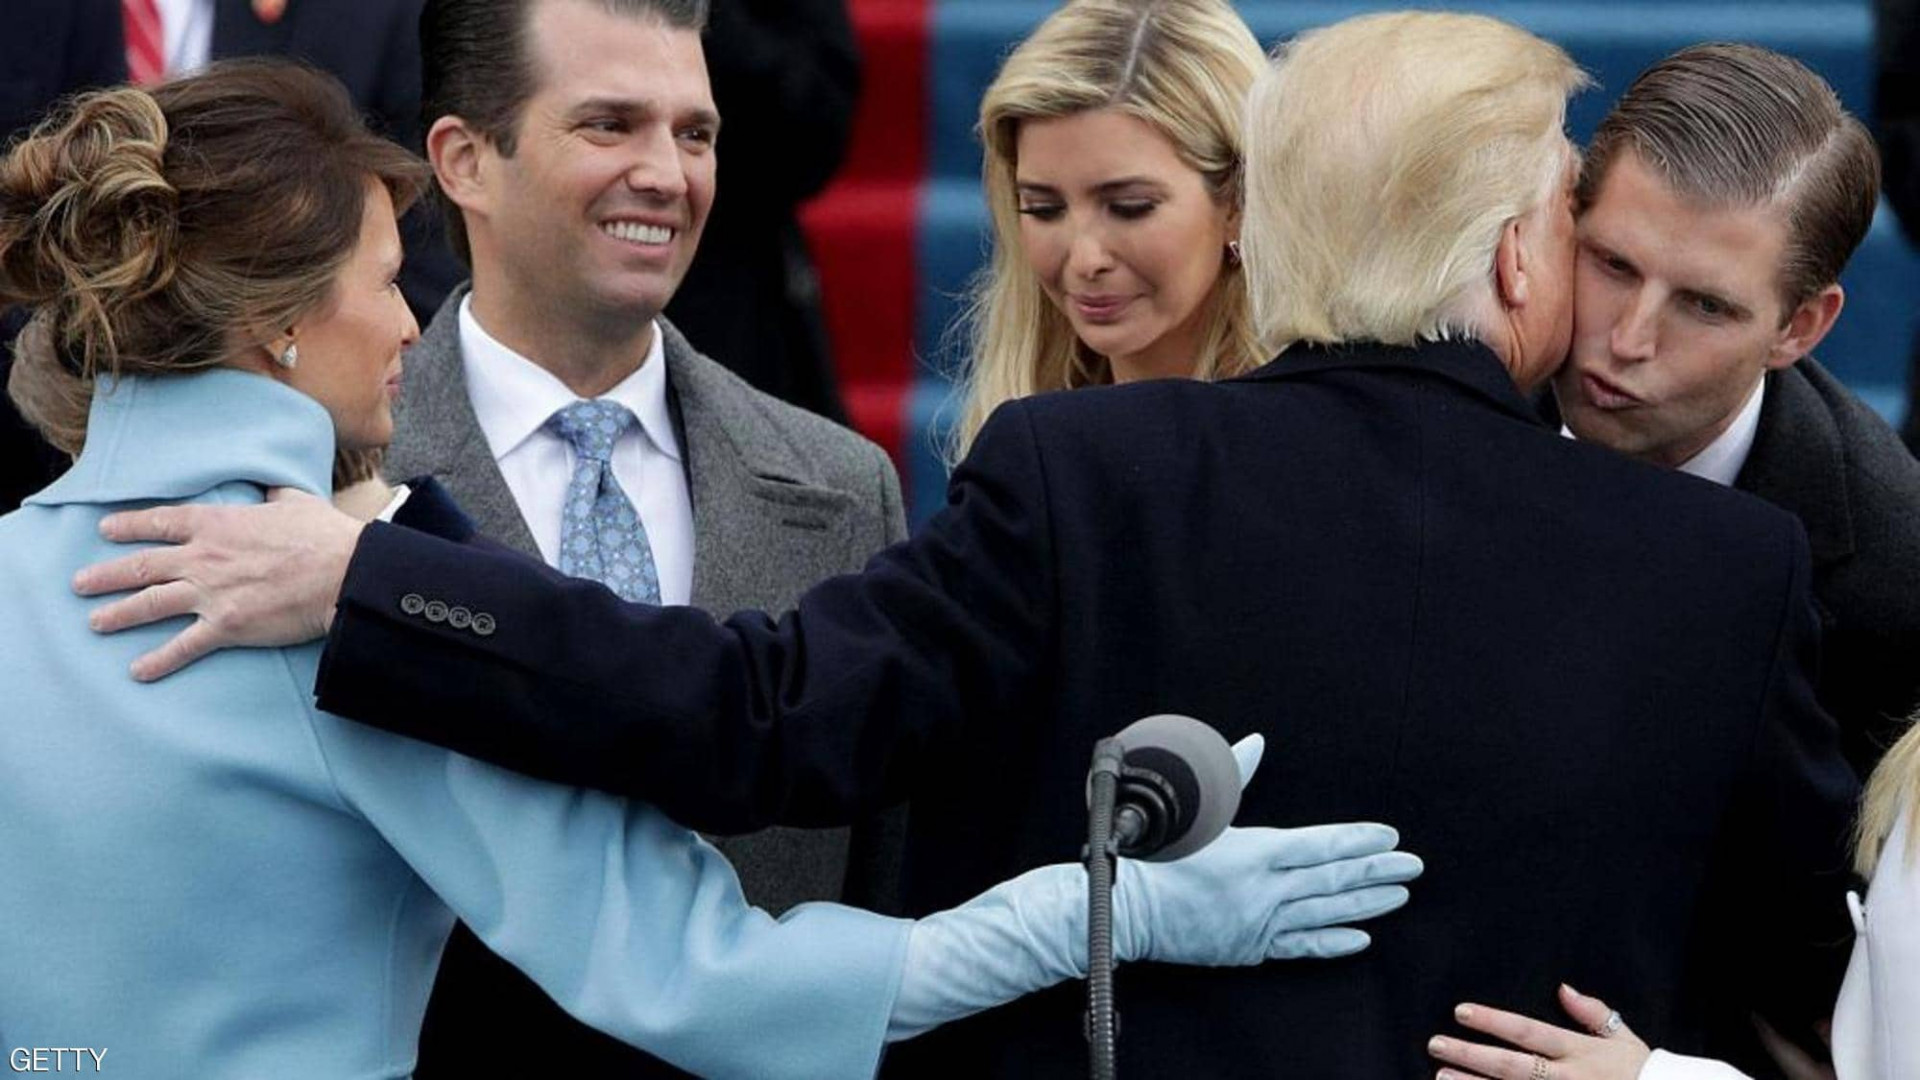 Explainer: Could Trump preemptively pardon his family — or even himself?